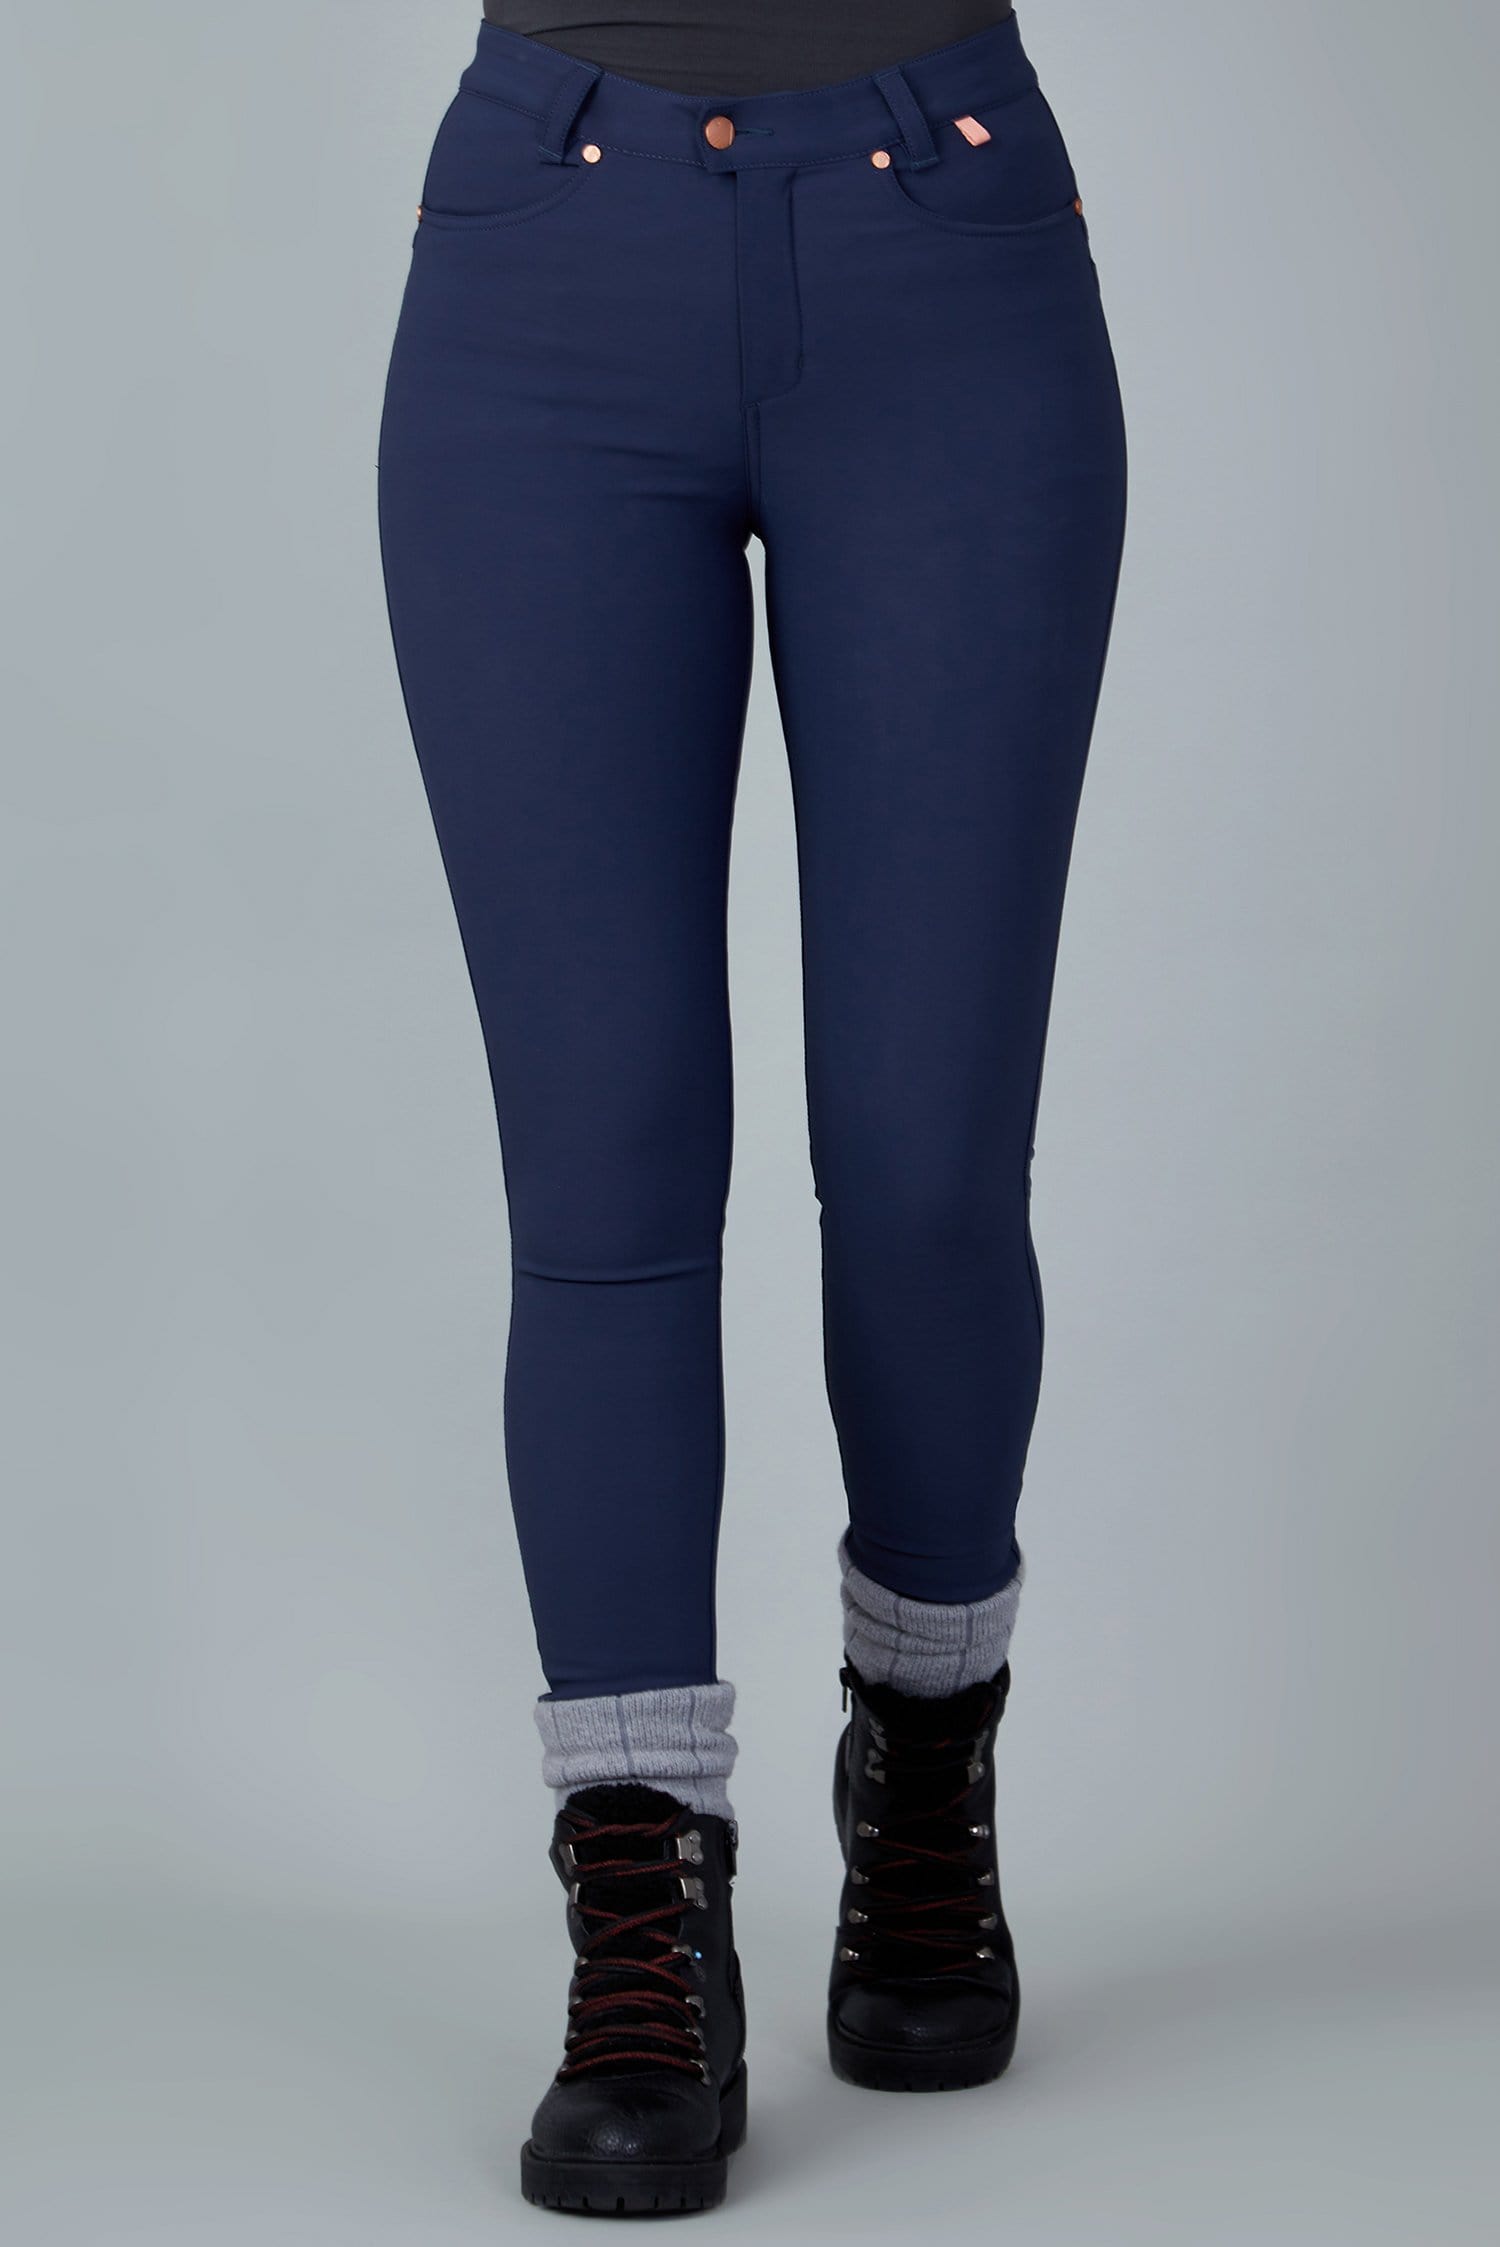 The Aventurite Stretch Skinny Outdoor Trousers - Midnight Blue - 38r / Uk20 - Womens - Acai Outdoorwear